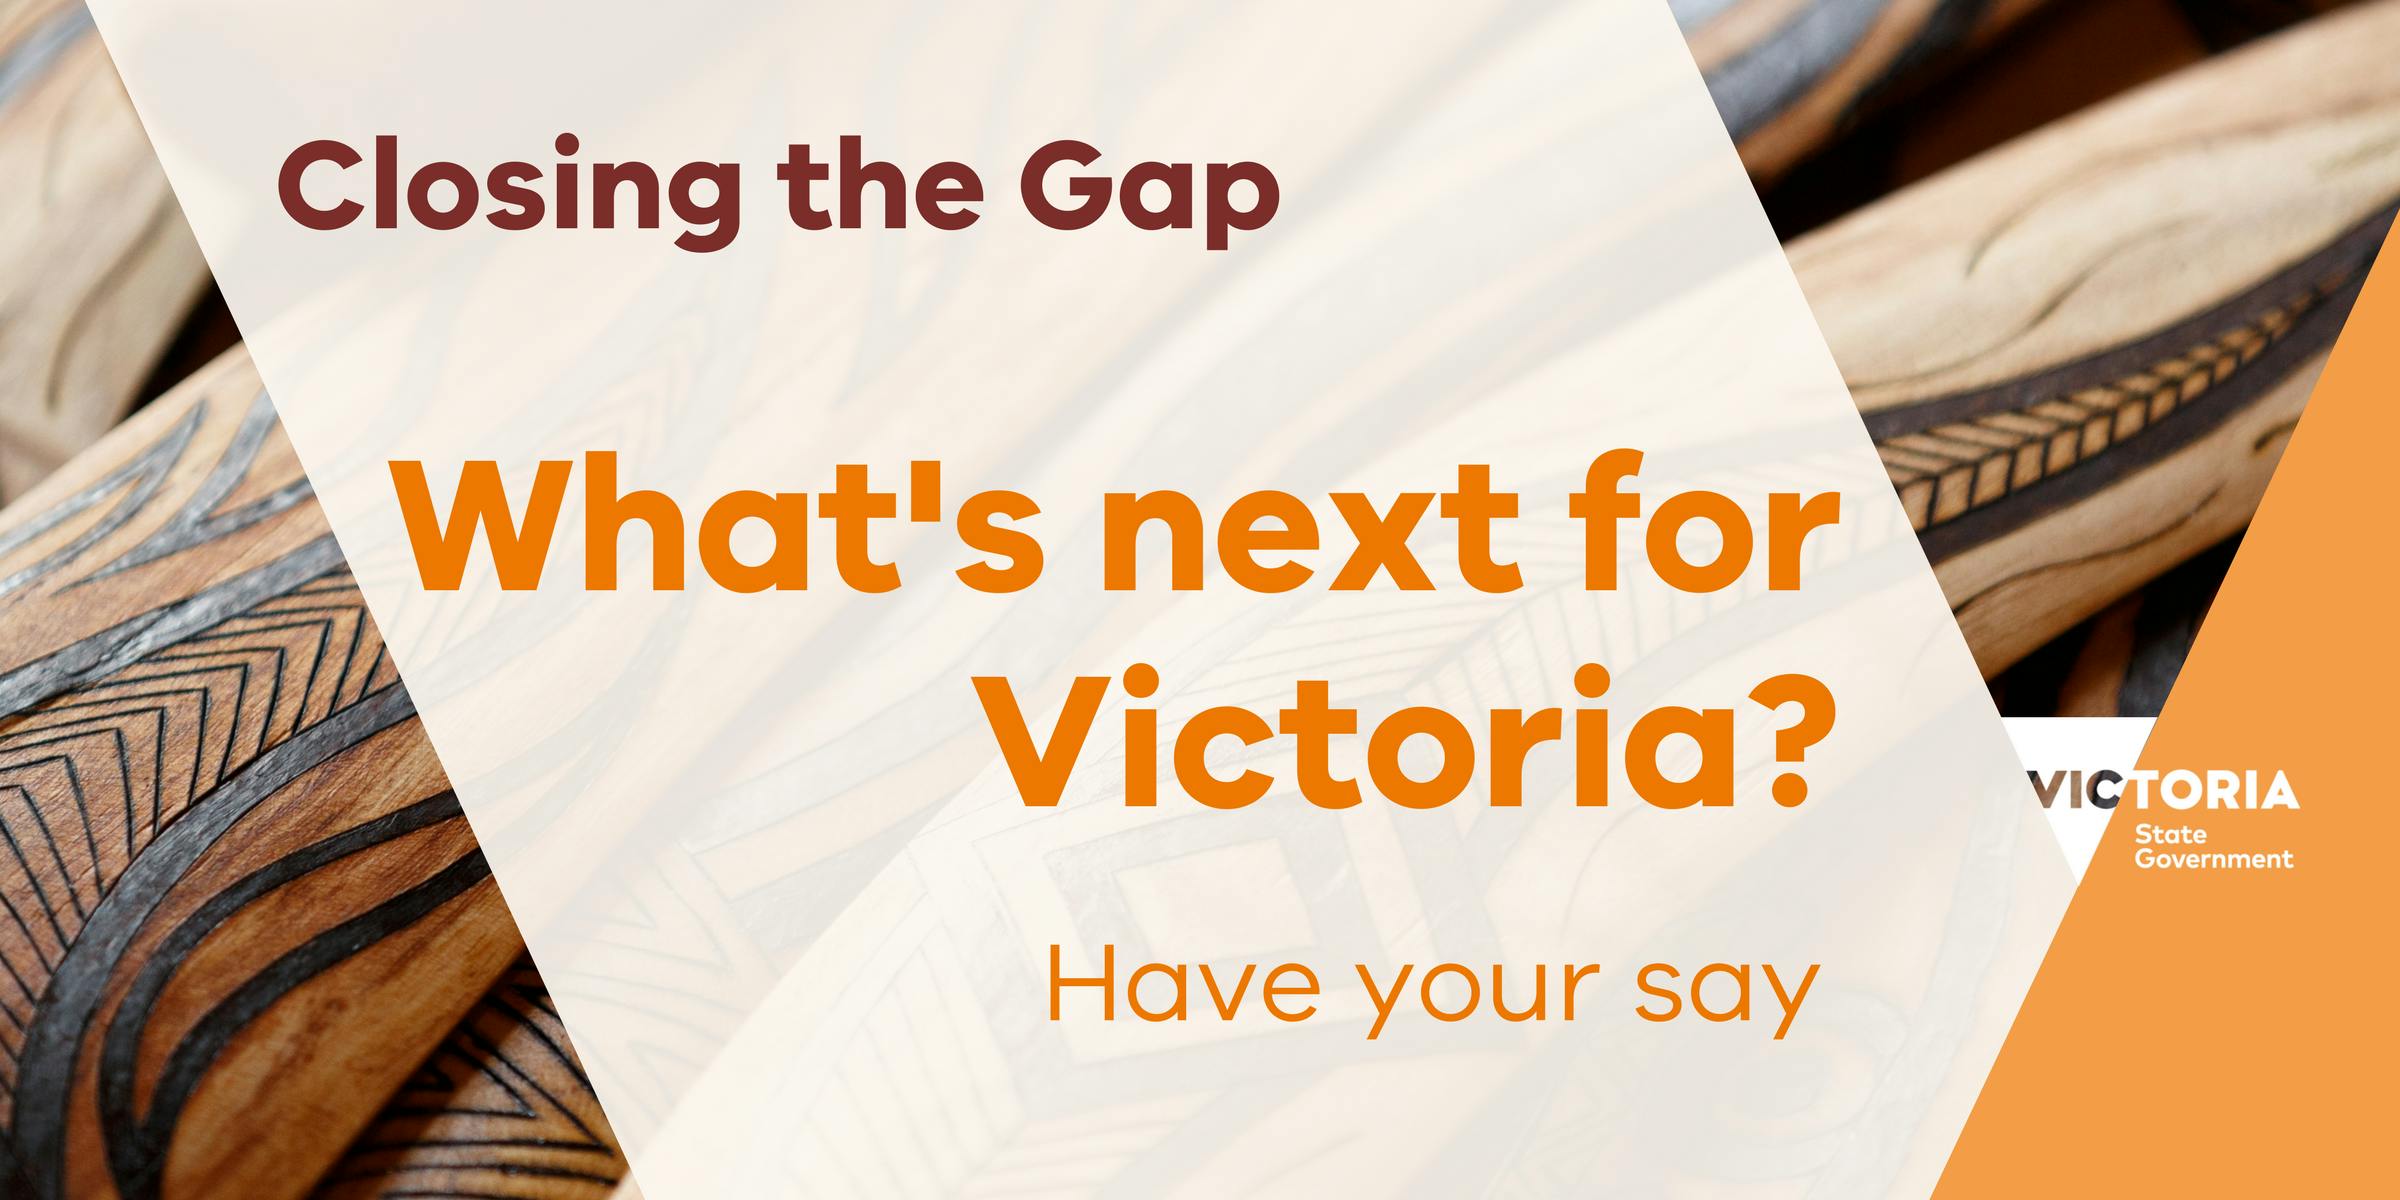 Closing the Gap: What's next for Victoria?